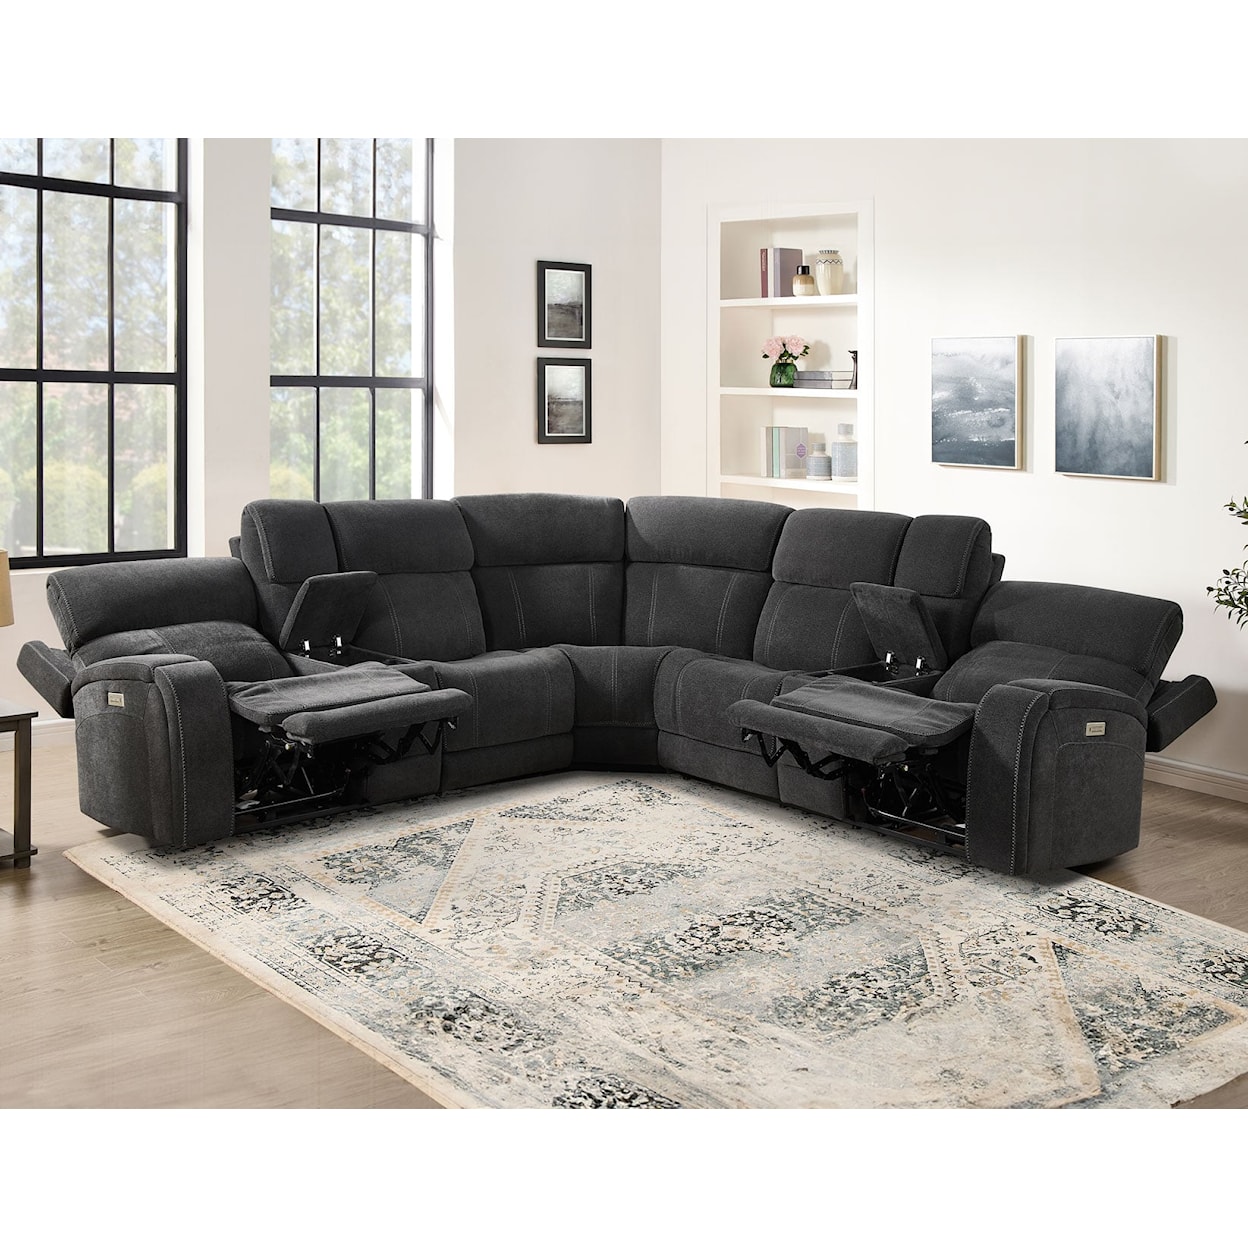 Prime Seattle Sectional Sofa